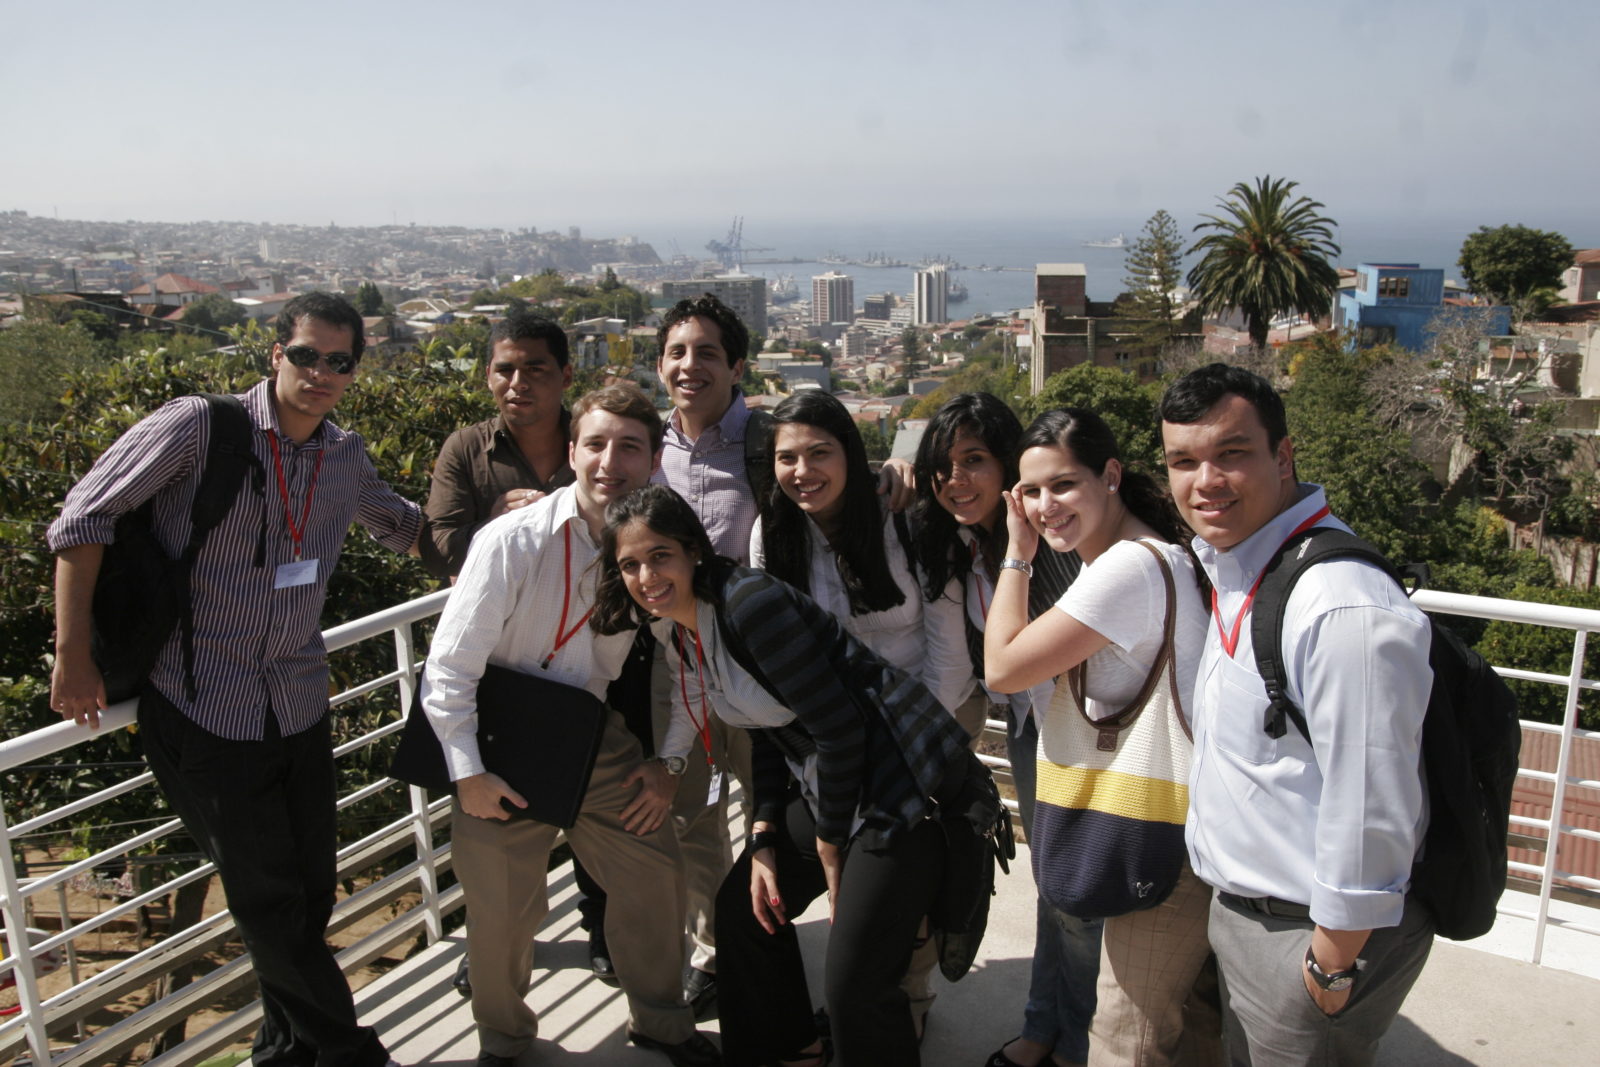 ILA students take in the views of Santiago, Chile.